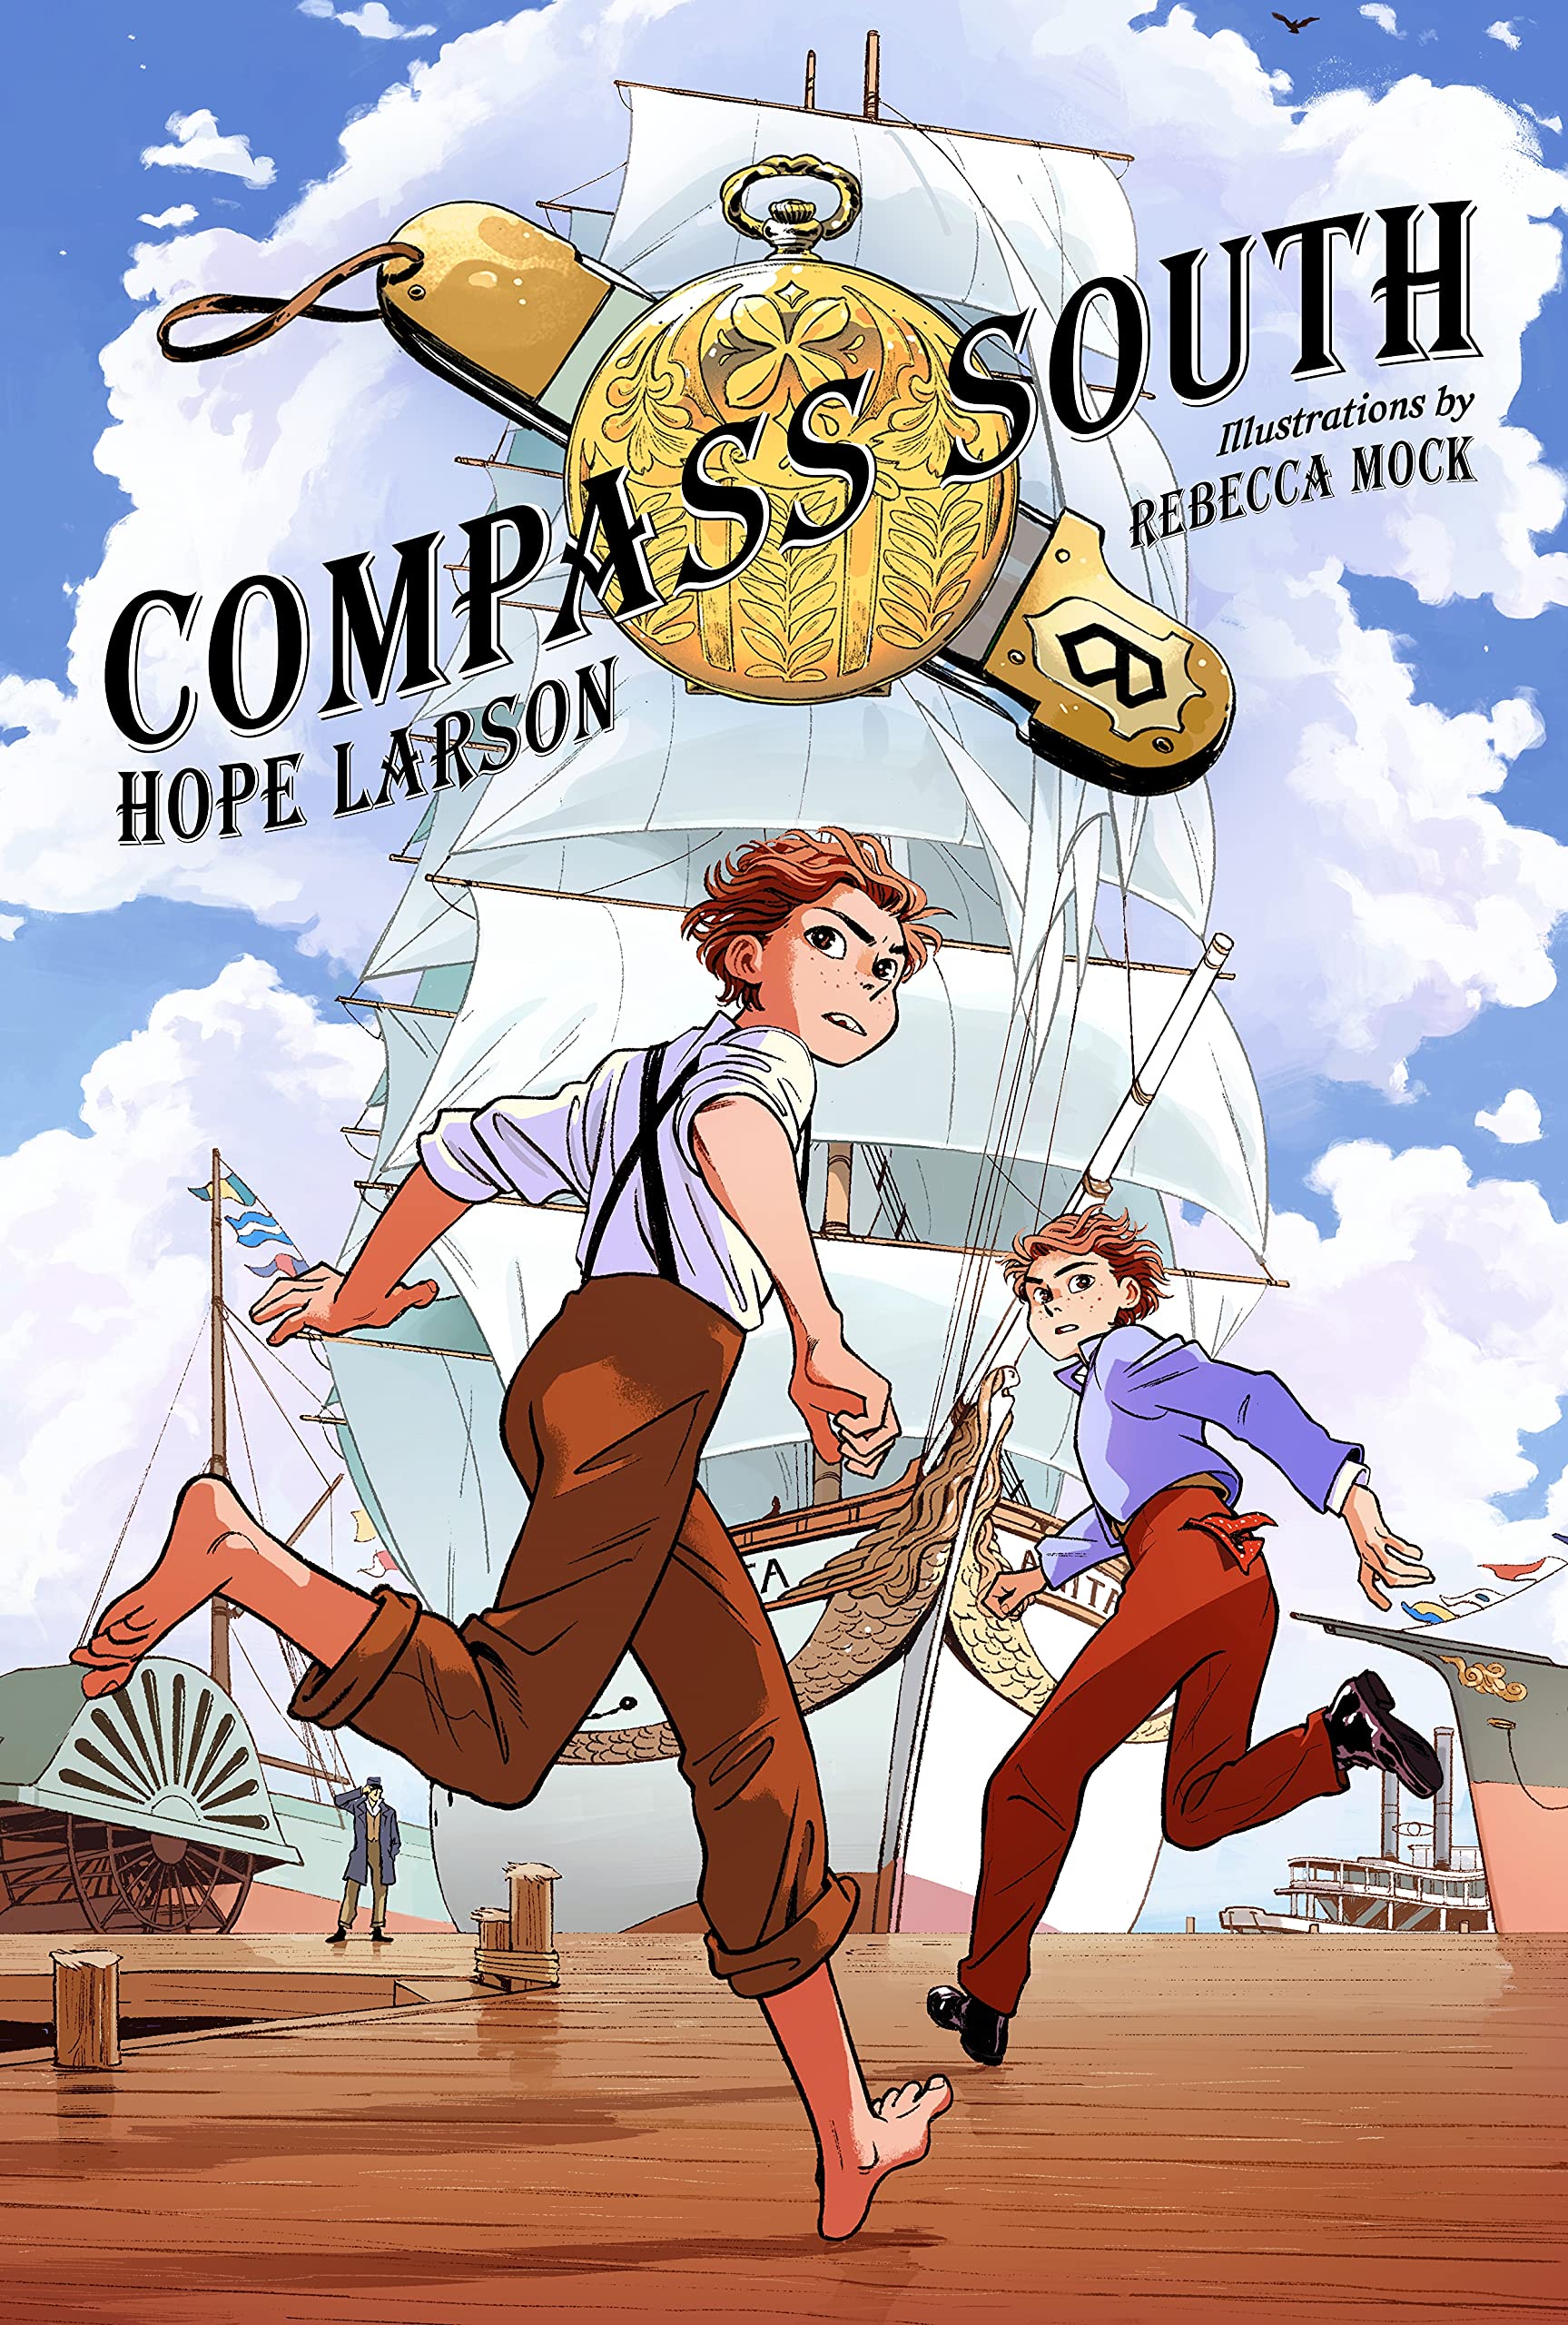 Book Cover of Compass South